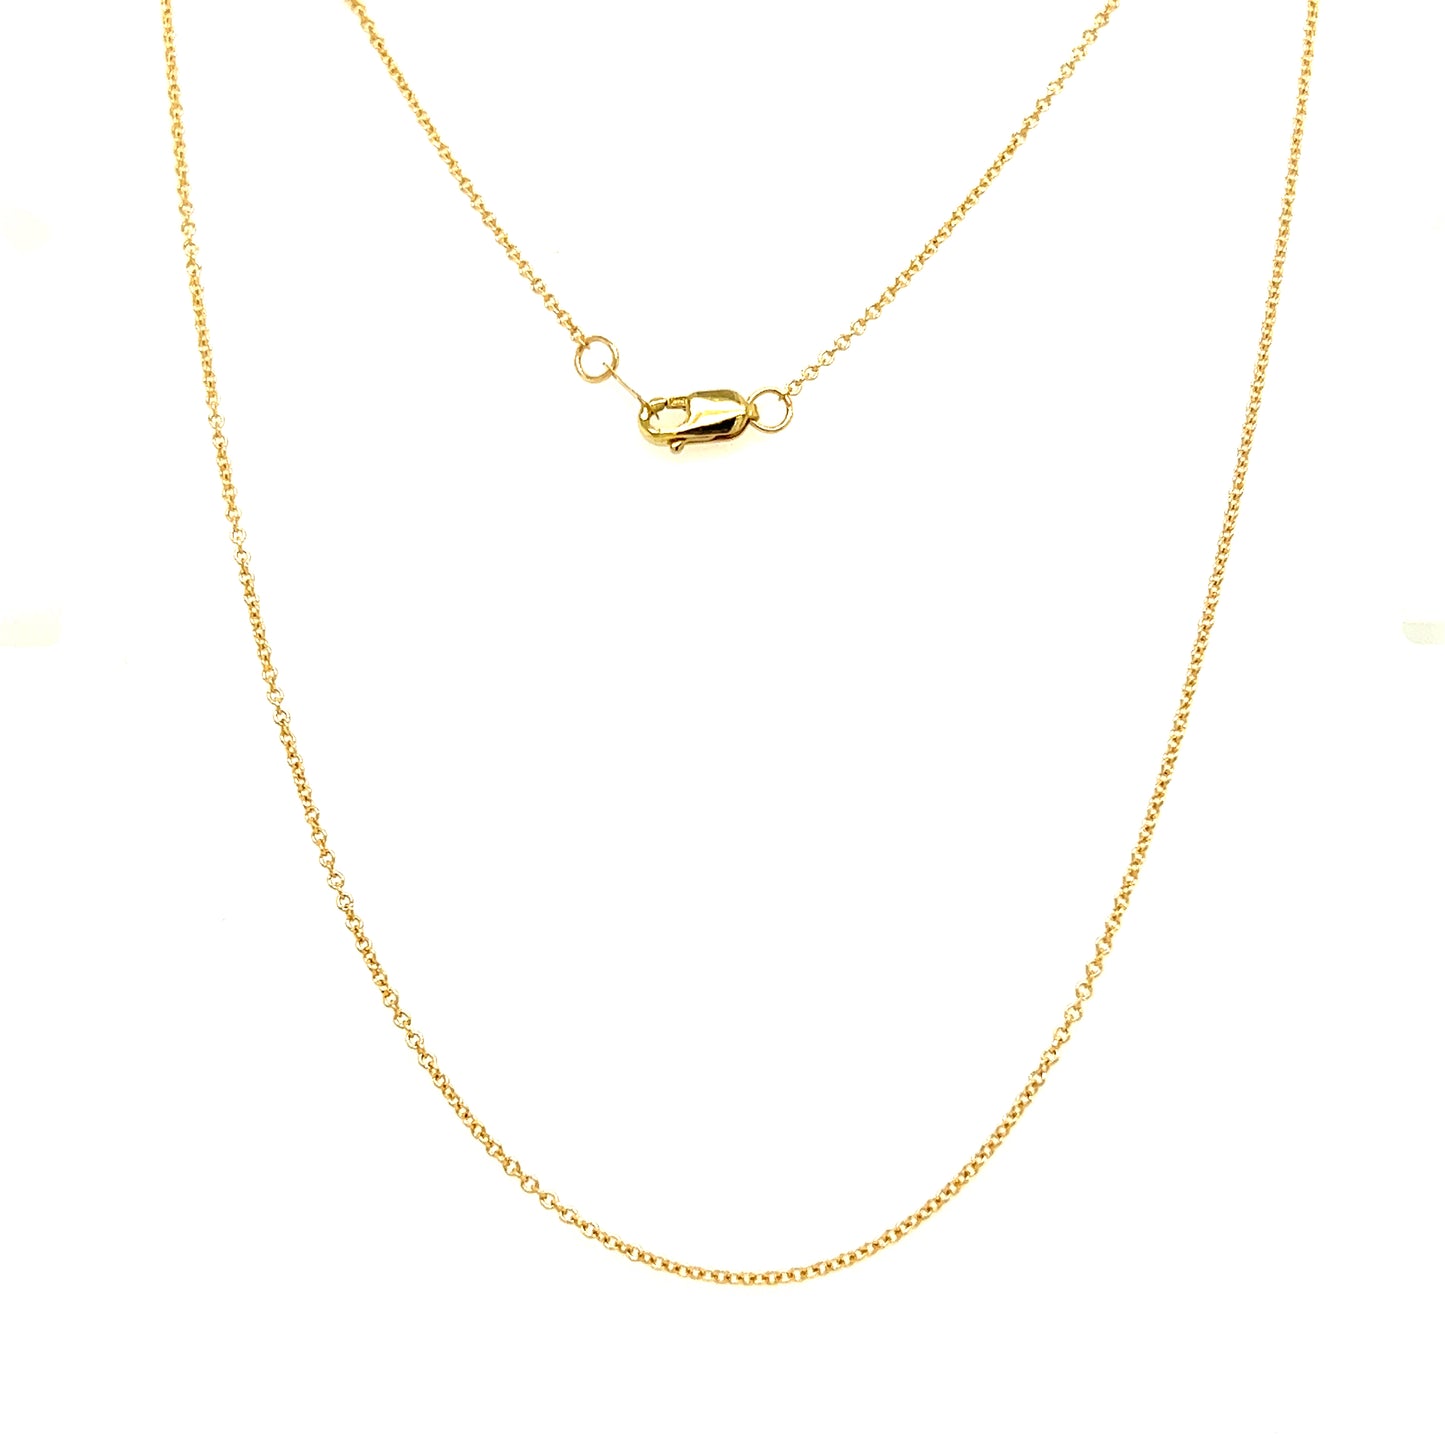 Cable Chain 1mm with 16in of Length in 14K Yellow Gold Full Chain Front View